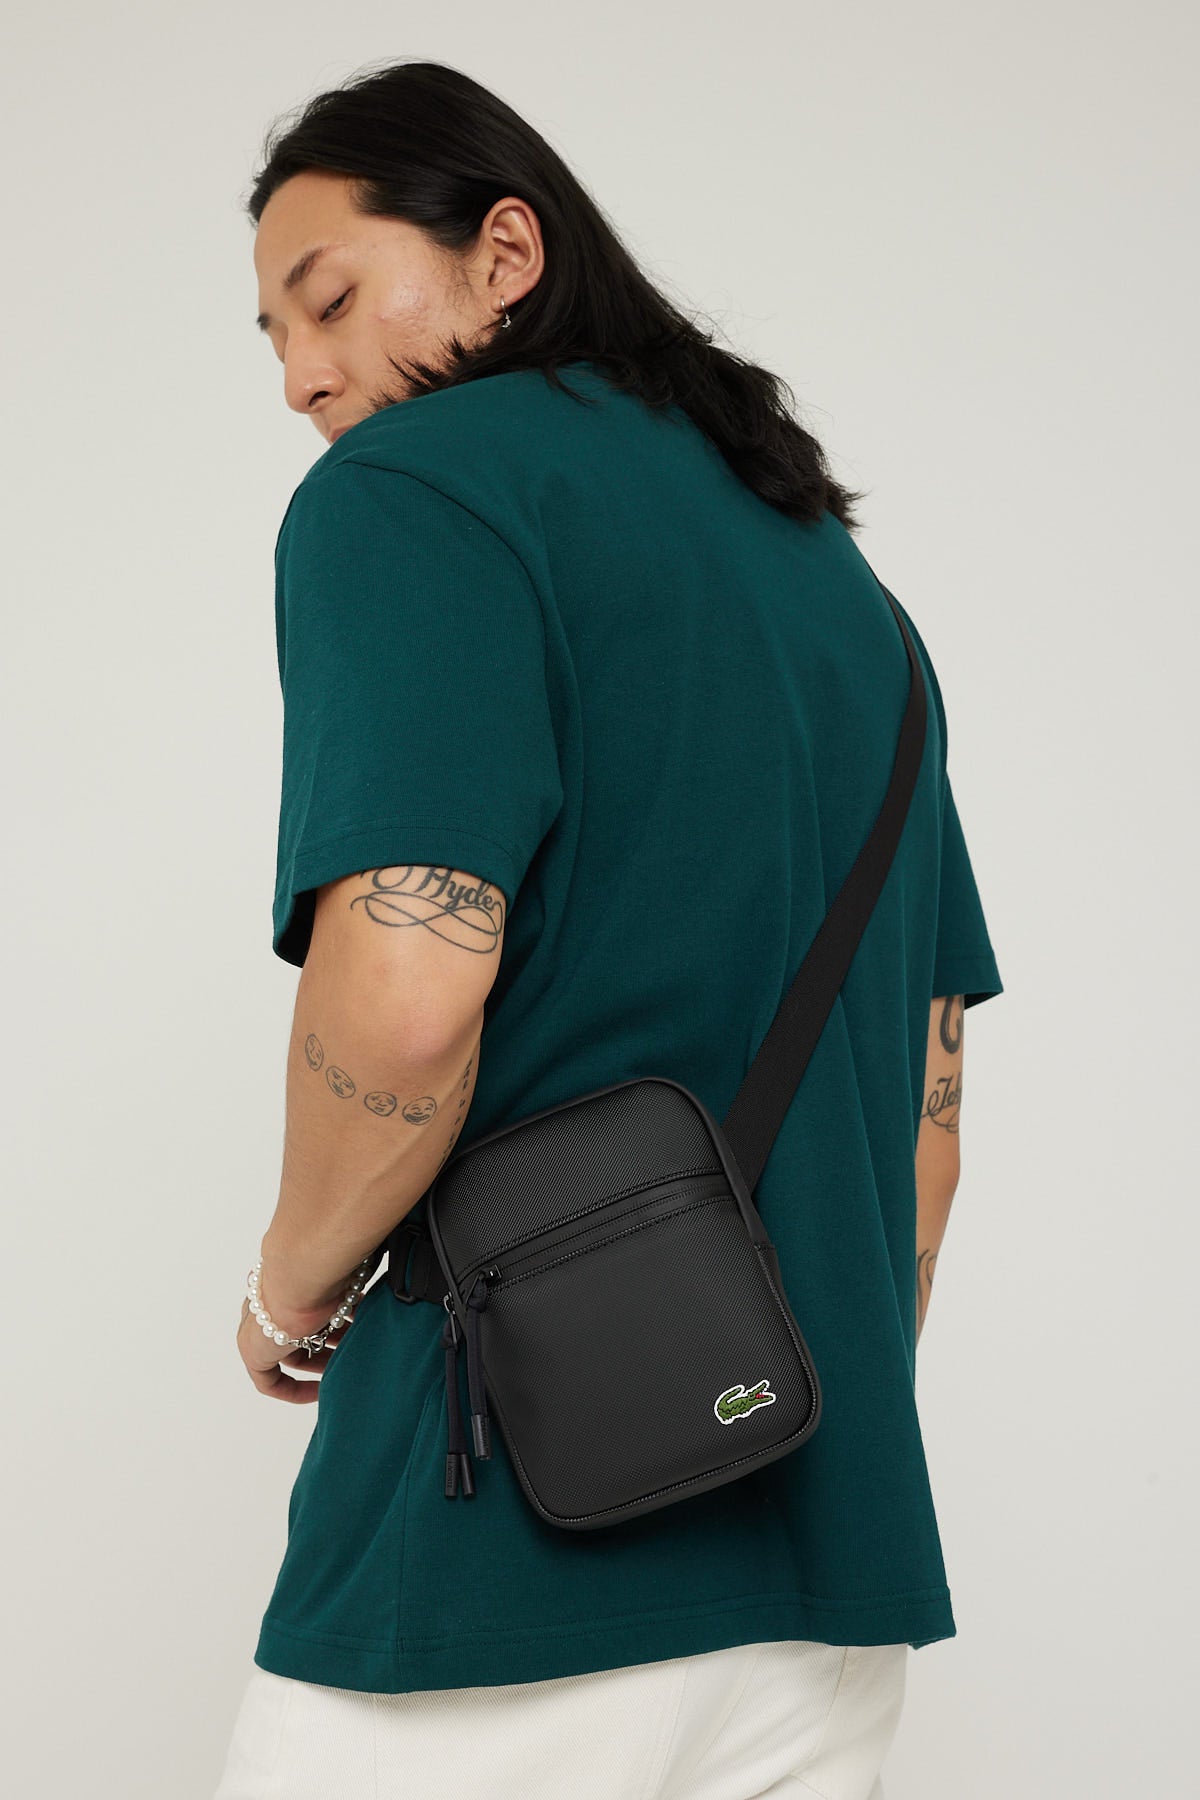 Lacoste LCST S Flat Crossover Bag Black